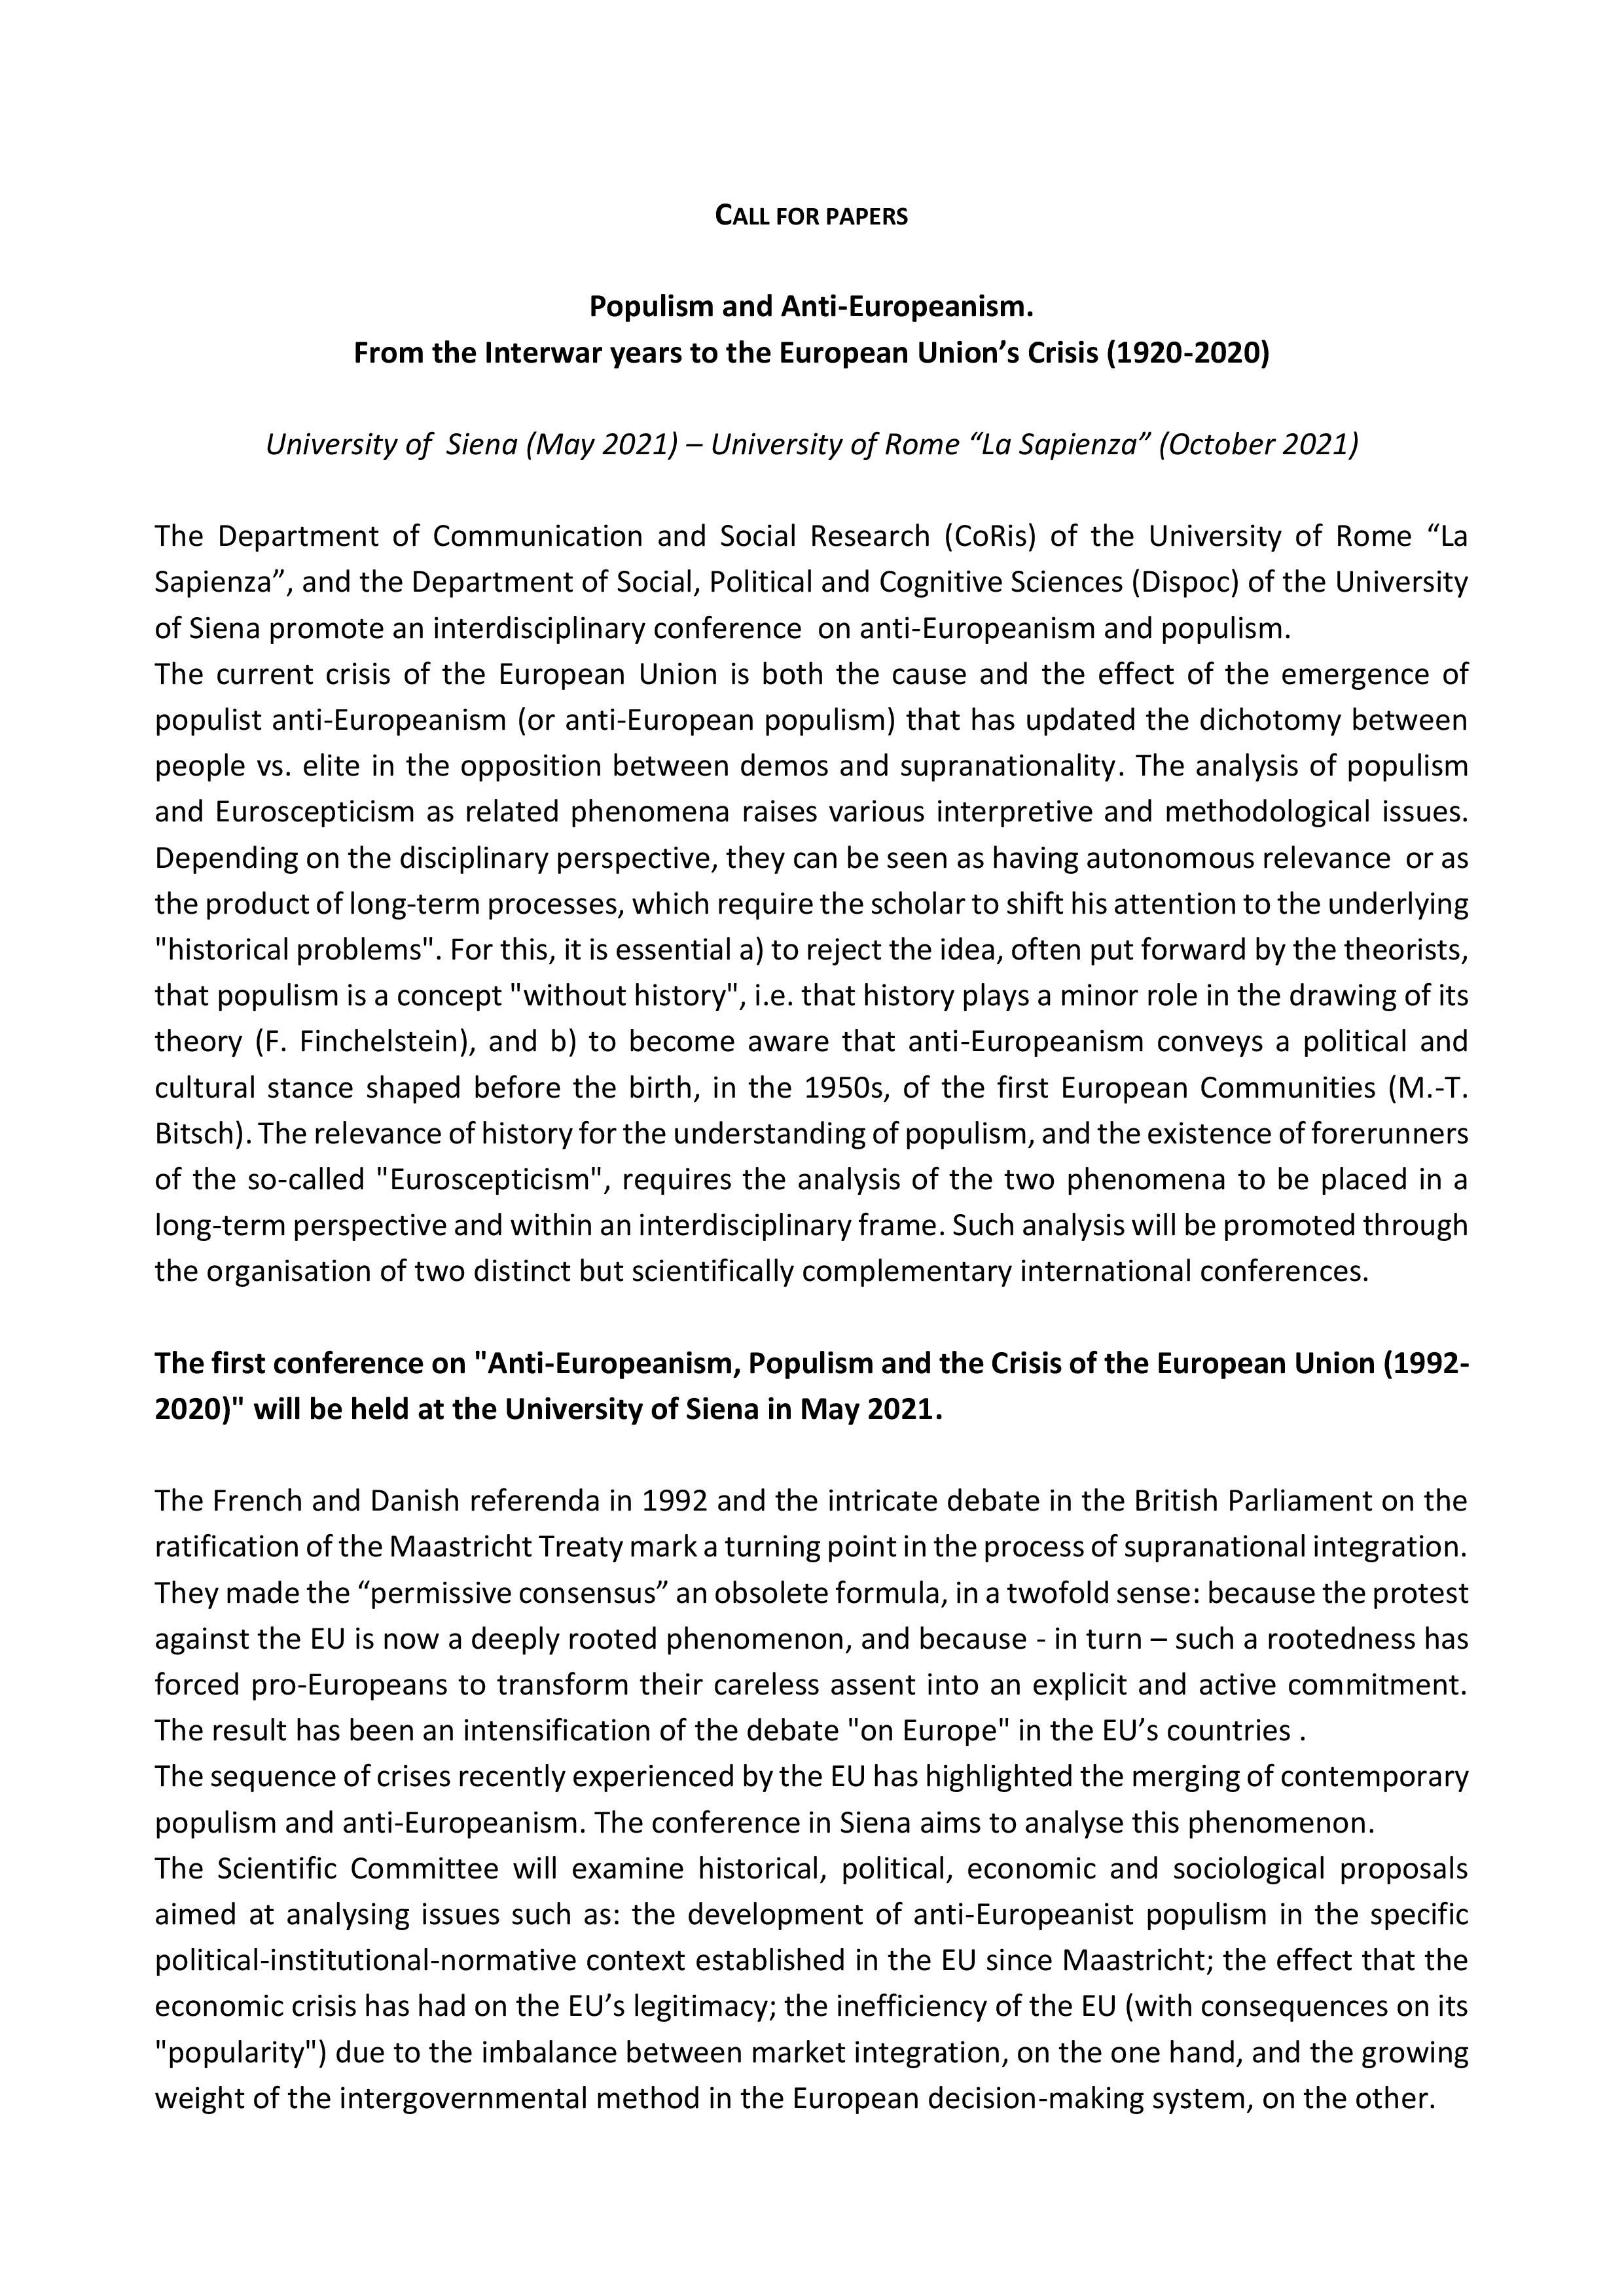 Antieuropeism and populism_call_en-page-001